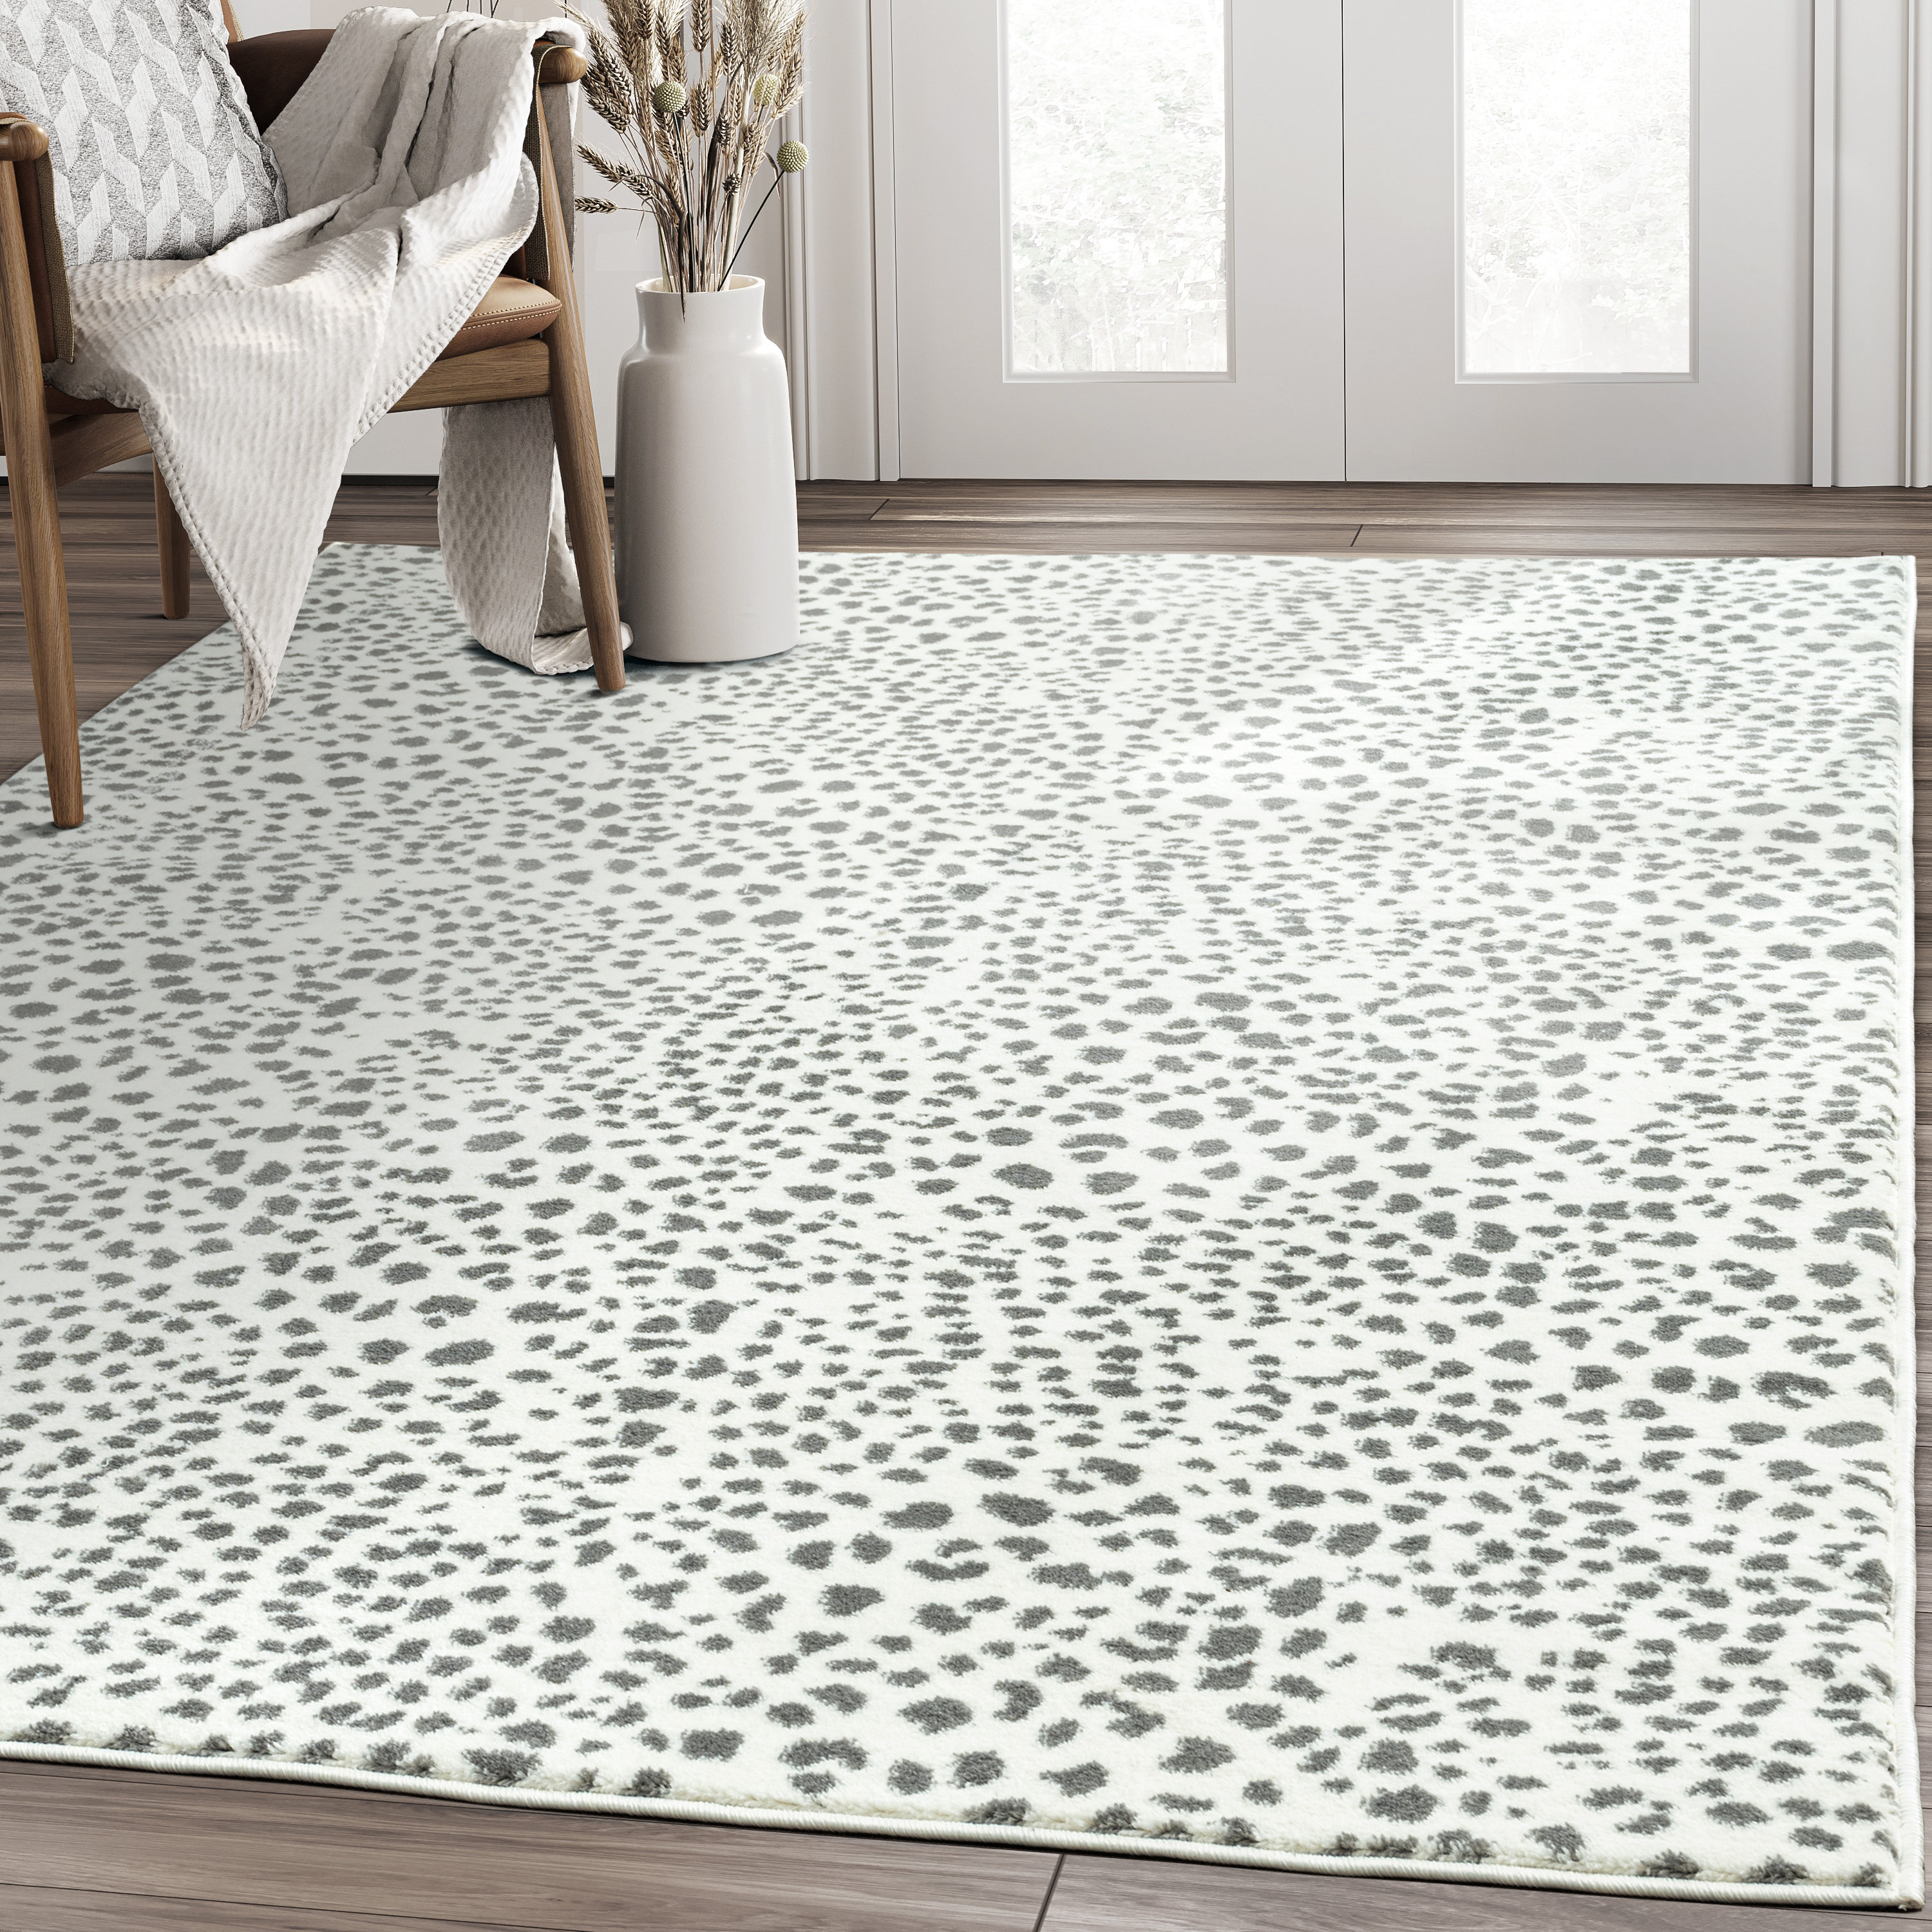 Leopard Print Carpet Grey and White Handtuft Rugs - China Residential  Carpet and Rugs price